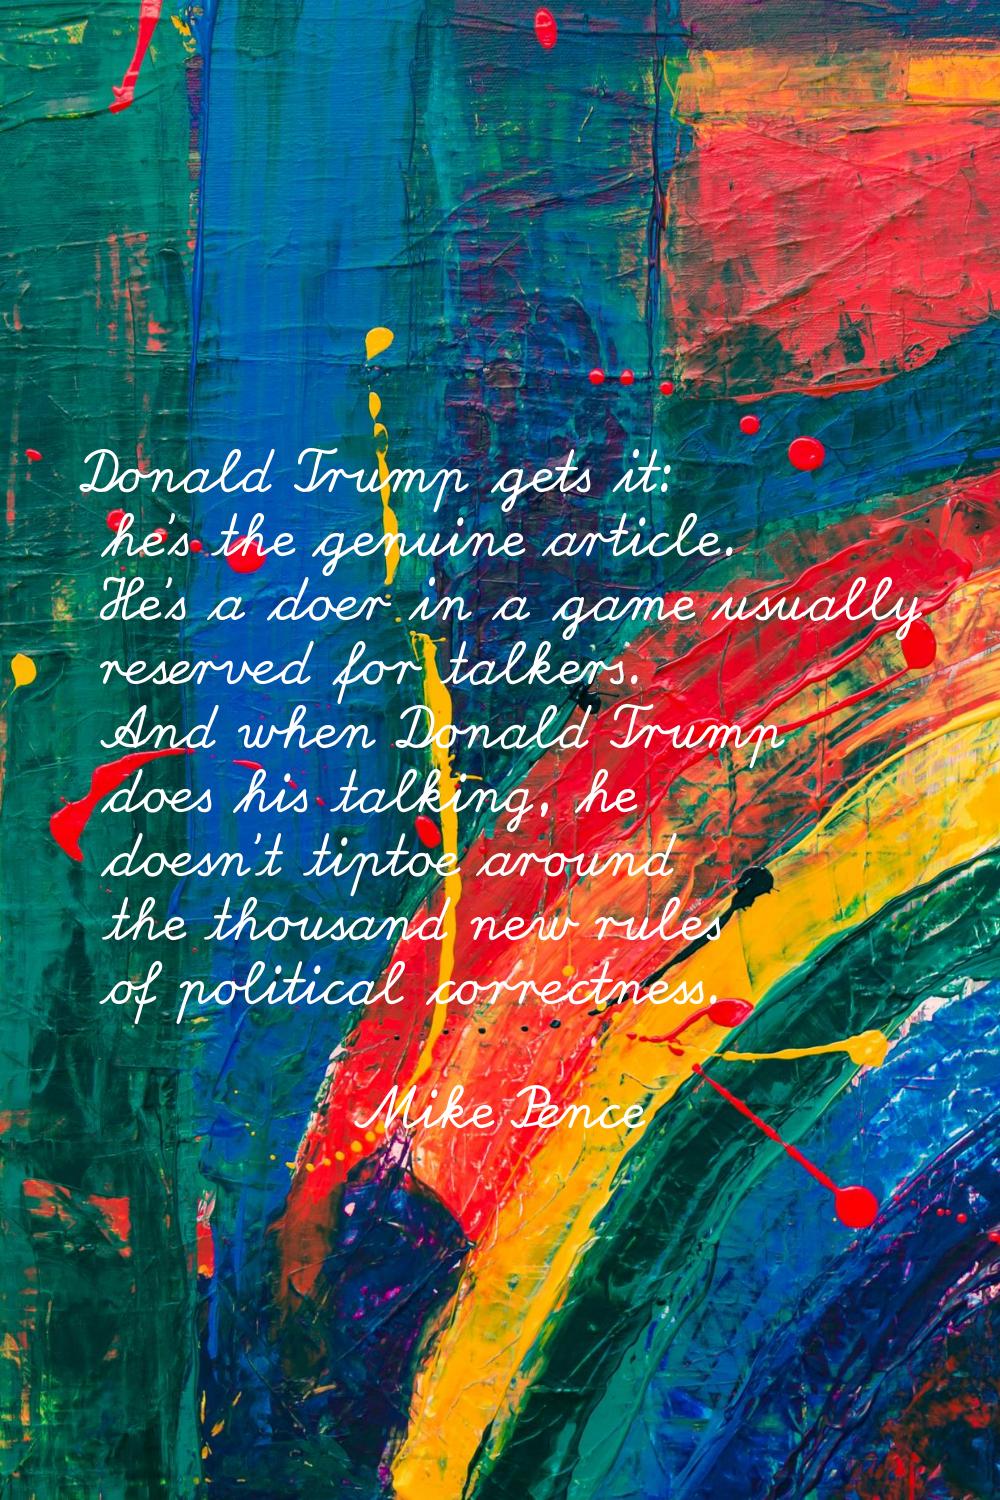 Donald Trump gets it: he's the genuine article. He's a doer in a game usually reserved for talkers.